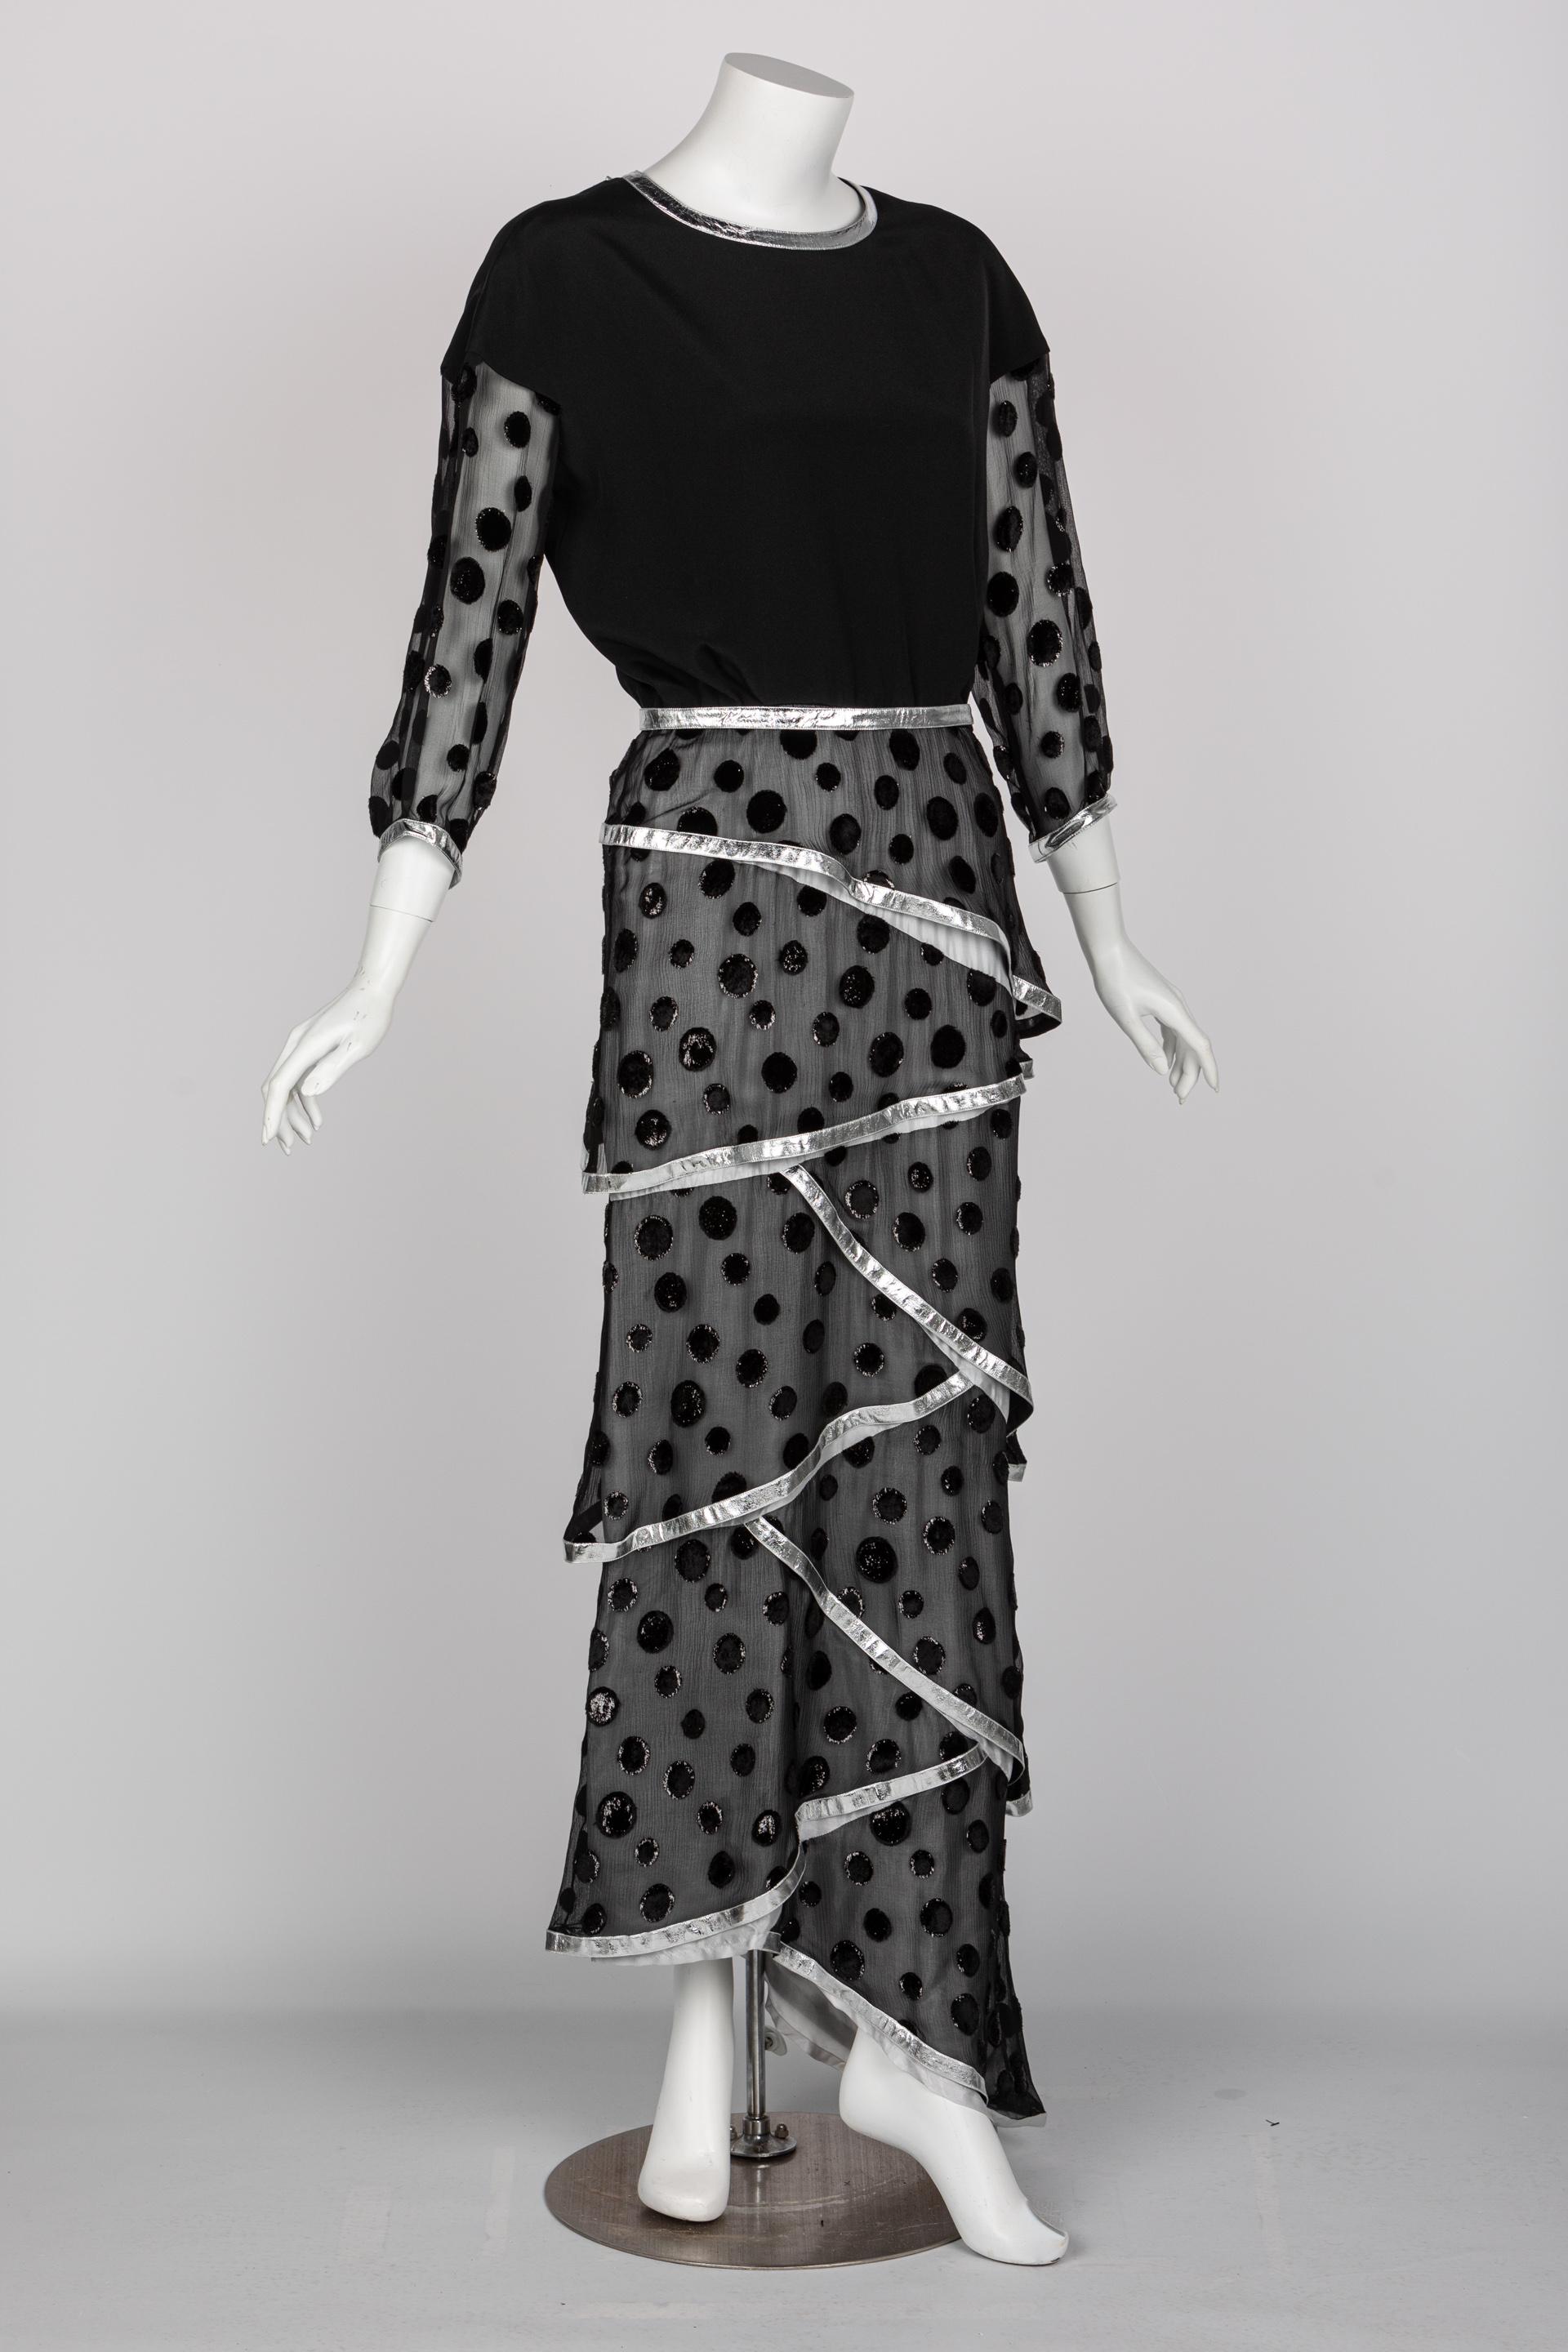 André Courrèges was a visionary of youthful and innovative designs. While known for his quirky space-age fashions, his later work offered a blend between unconventional fabrics and classic design features. This 1973 maxi dress features a silky black